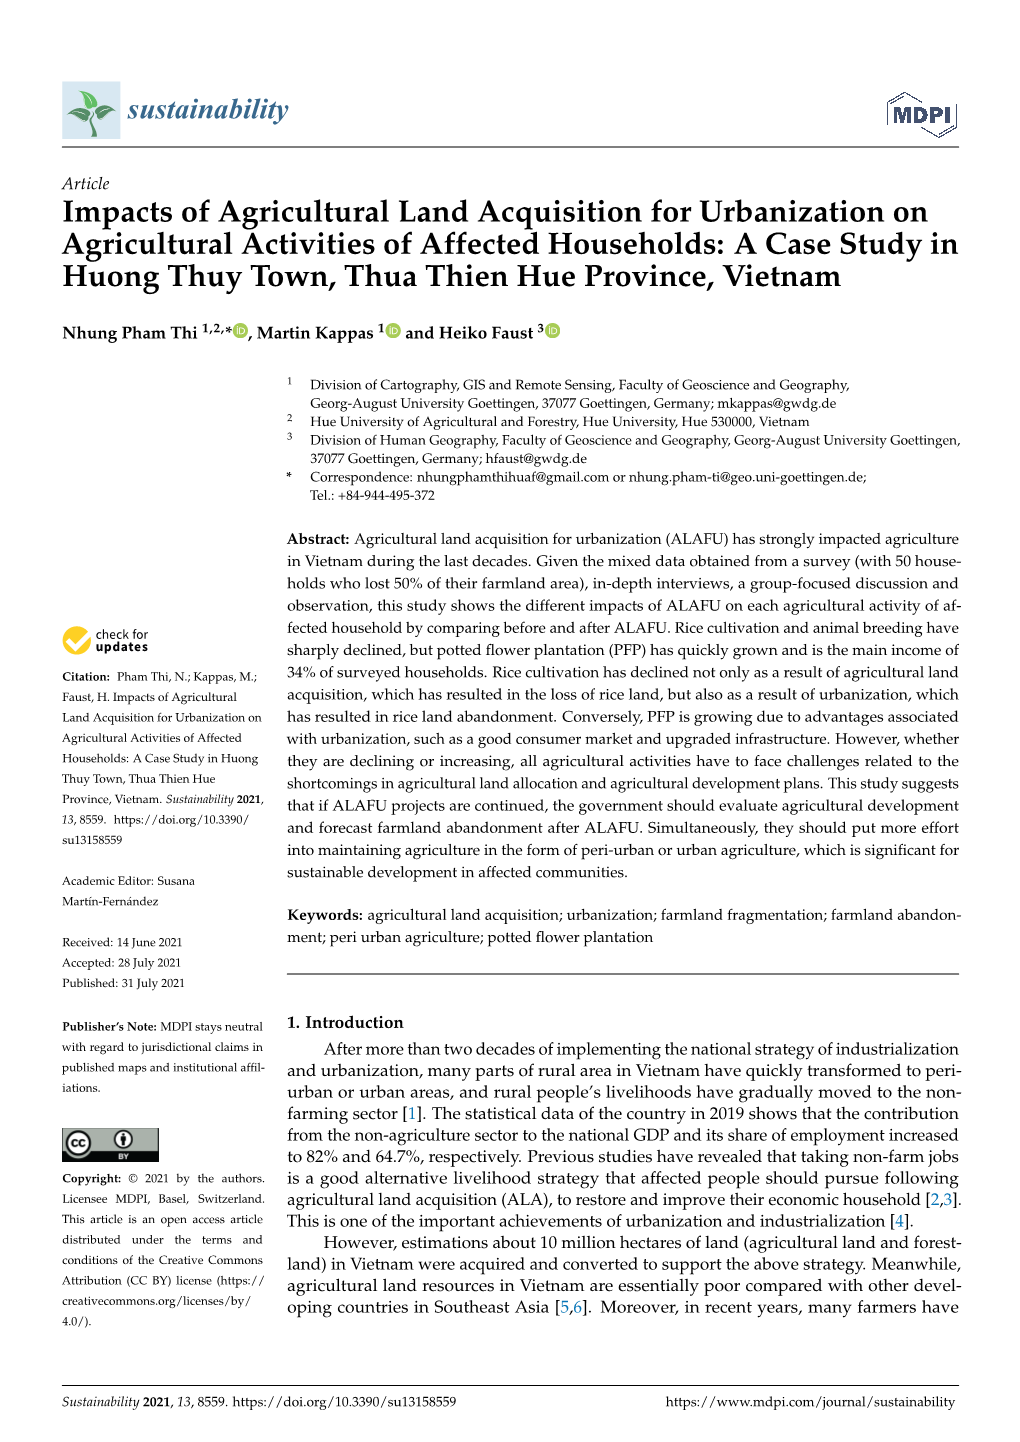 Impacts of Agricultural Land Acquisition for Urbanization on Agricultural Activities of Affected Households: a Case Study In